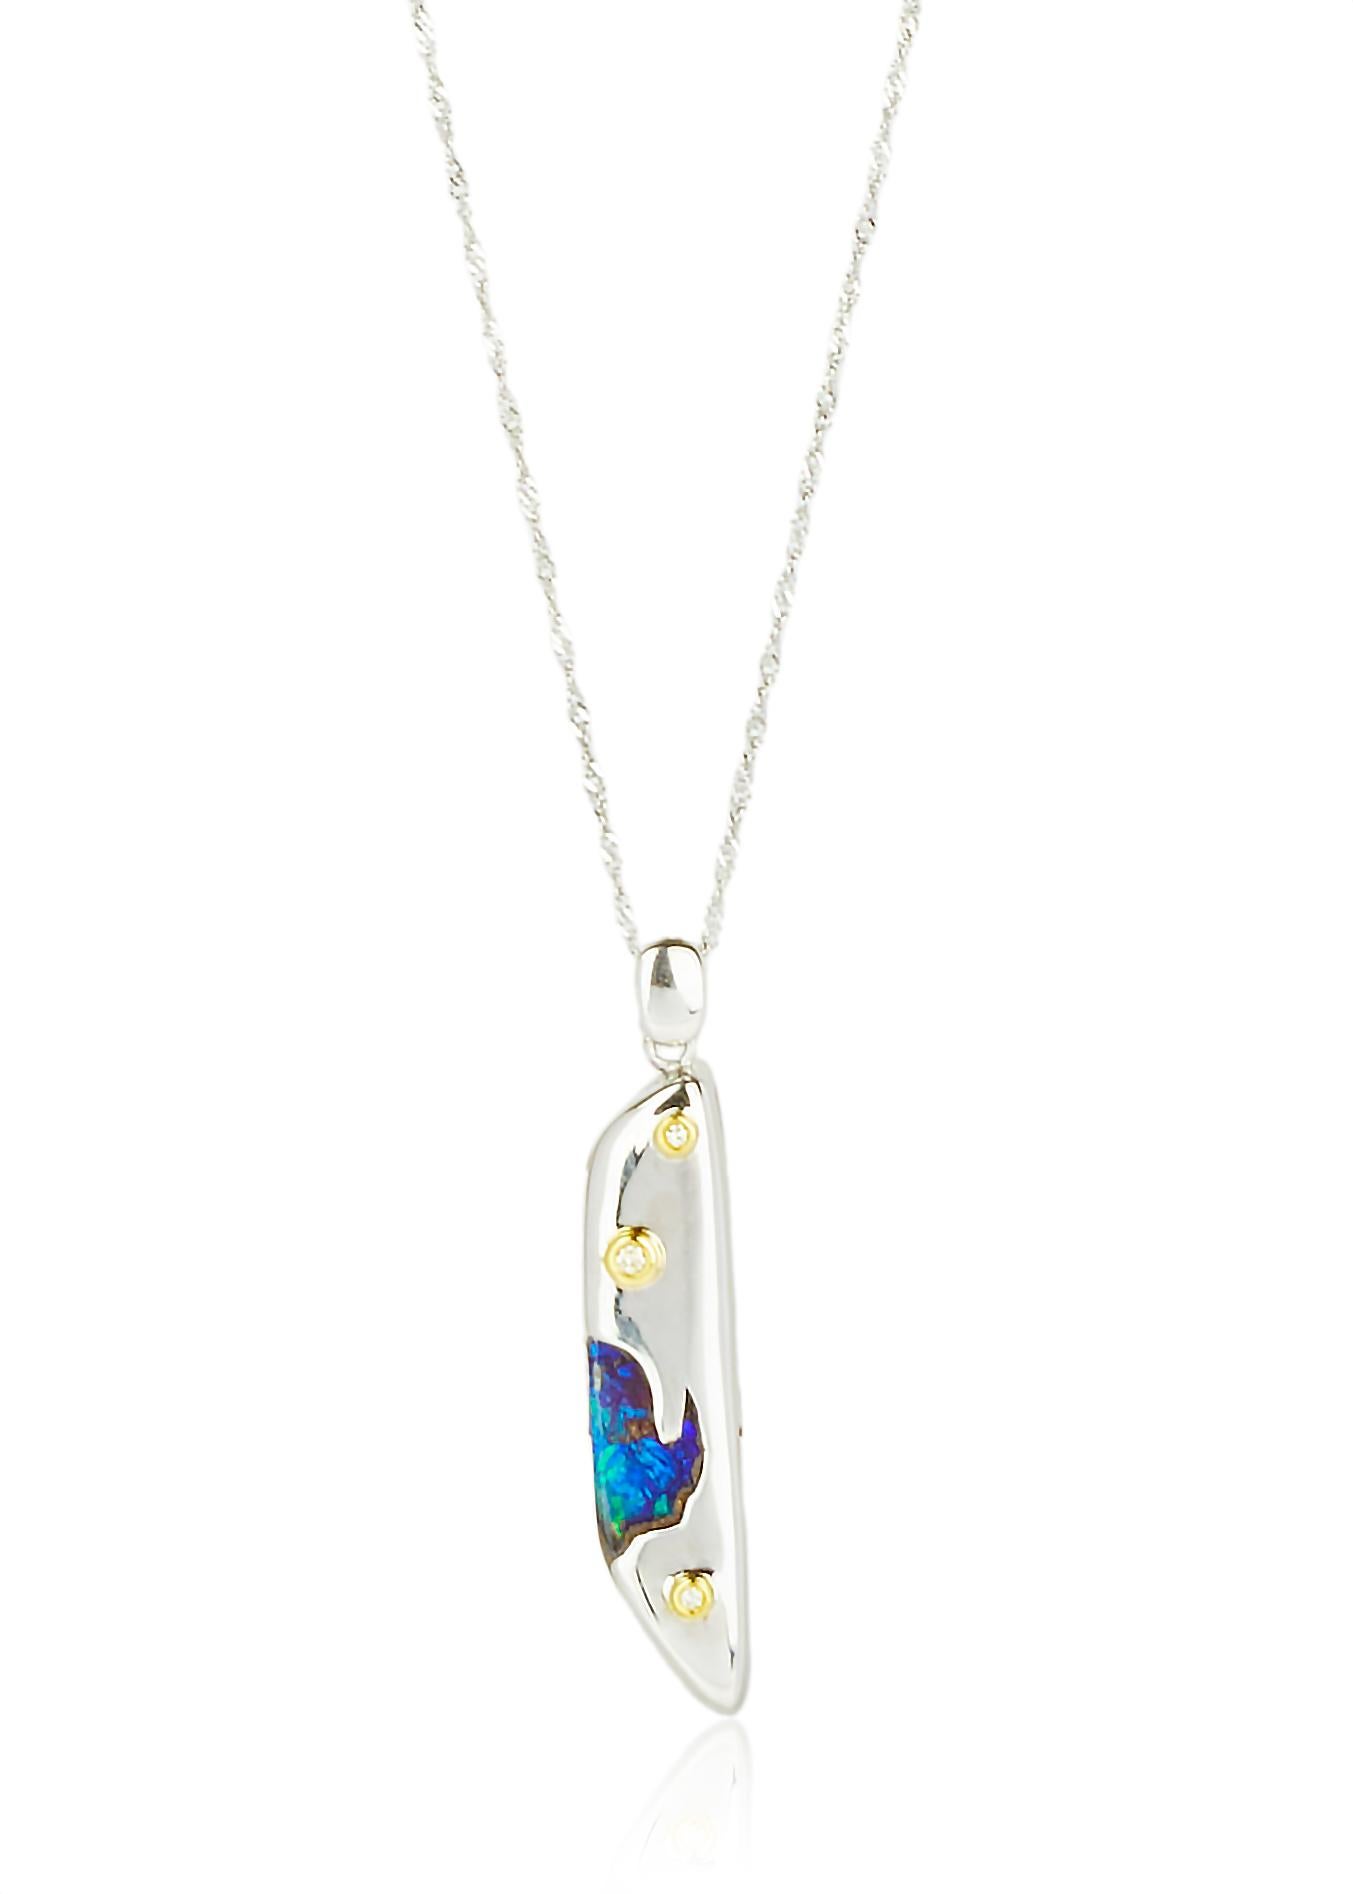 Brilliant Cut 18K White & Yellow Gold Hand-Carved Boulder Opal Diamond Pendant For Sale